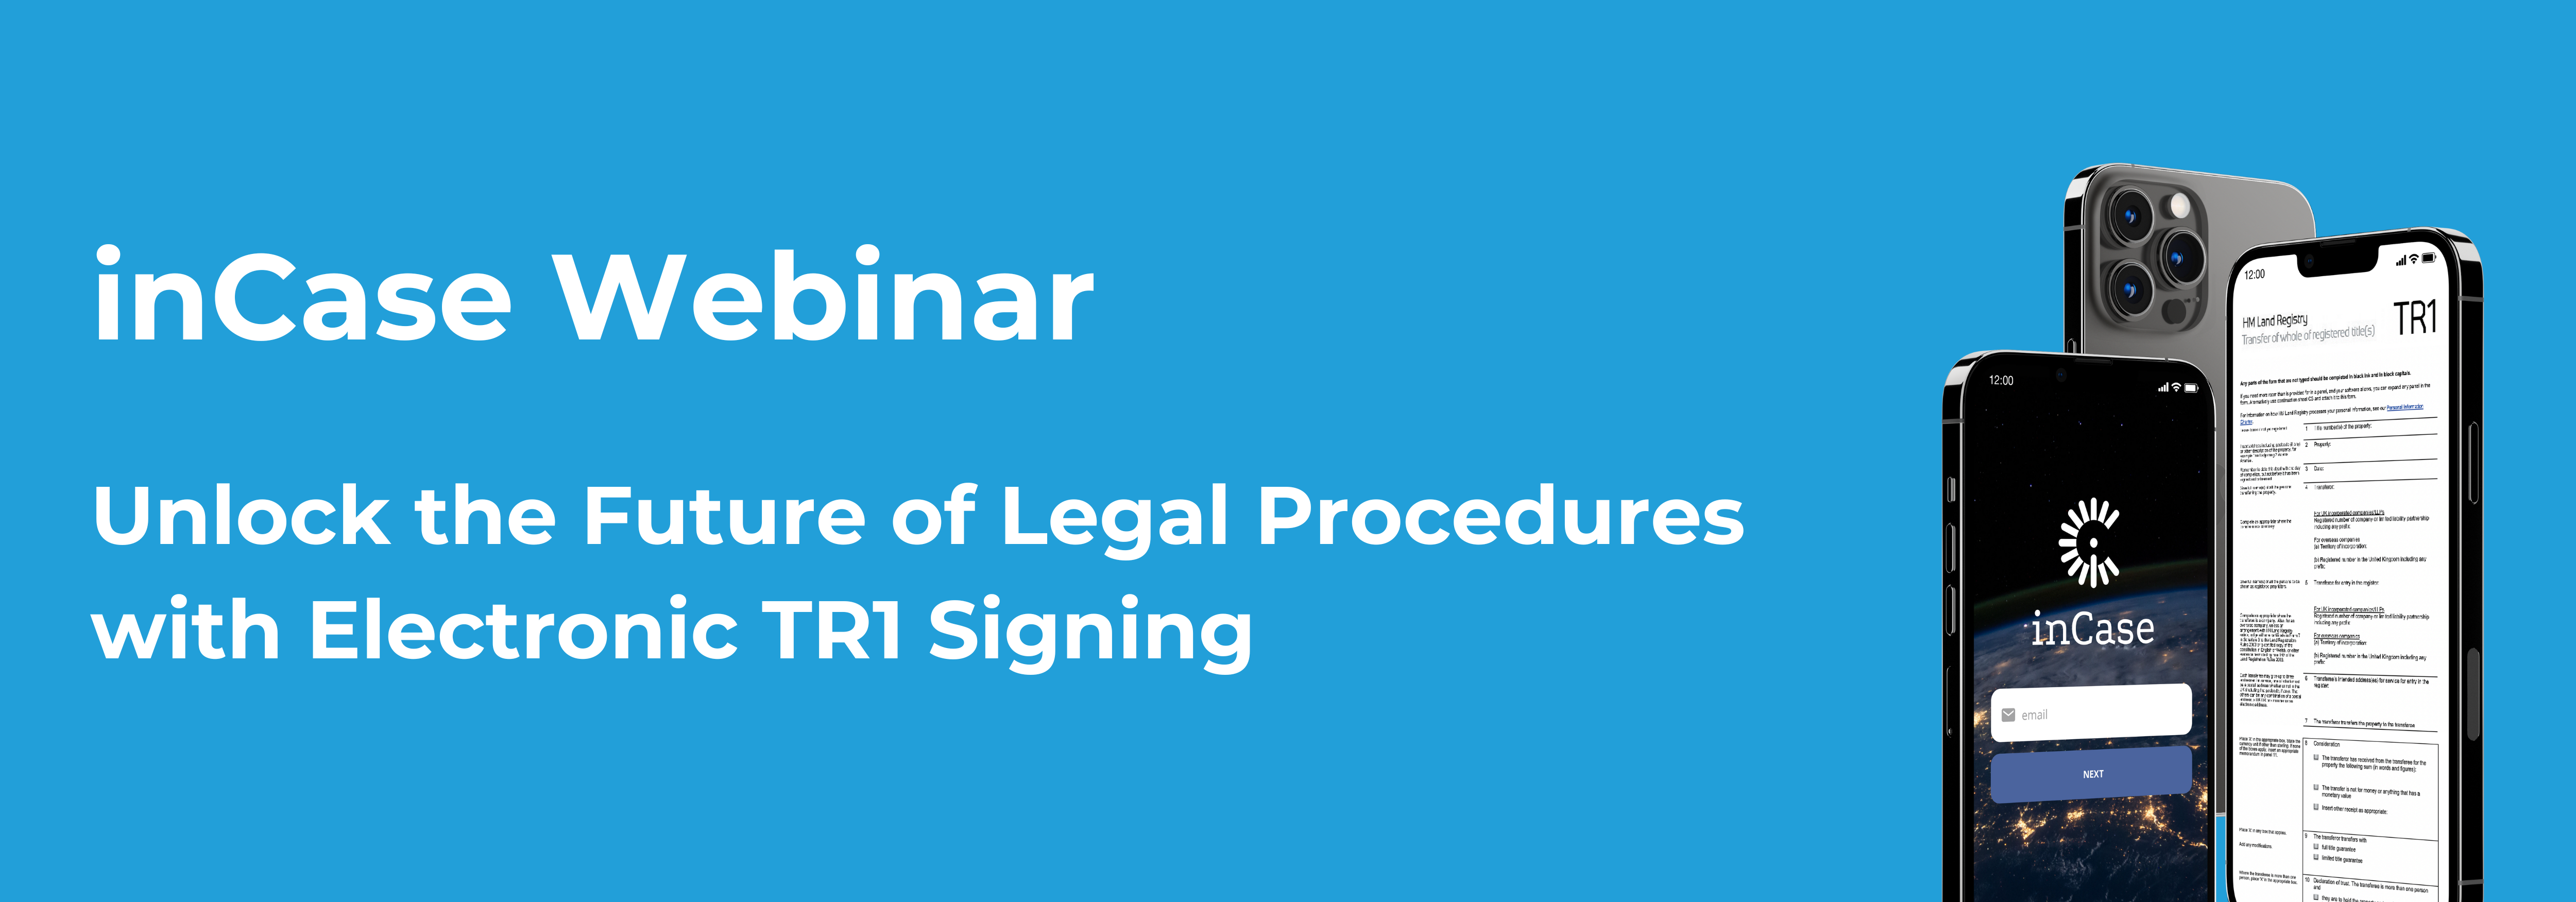 inCase Webinar: Unlock the Future of Legal Procedures with Electronic TR1 Signing